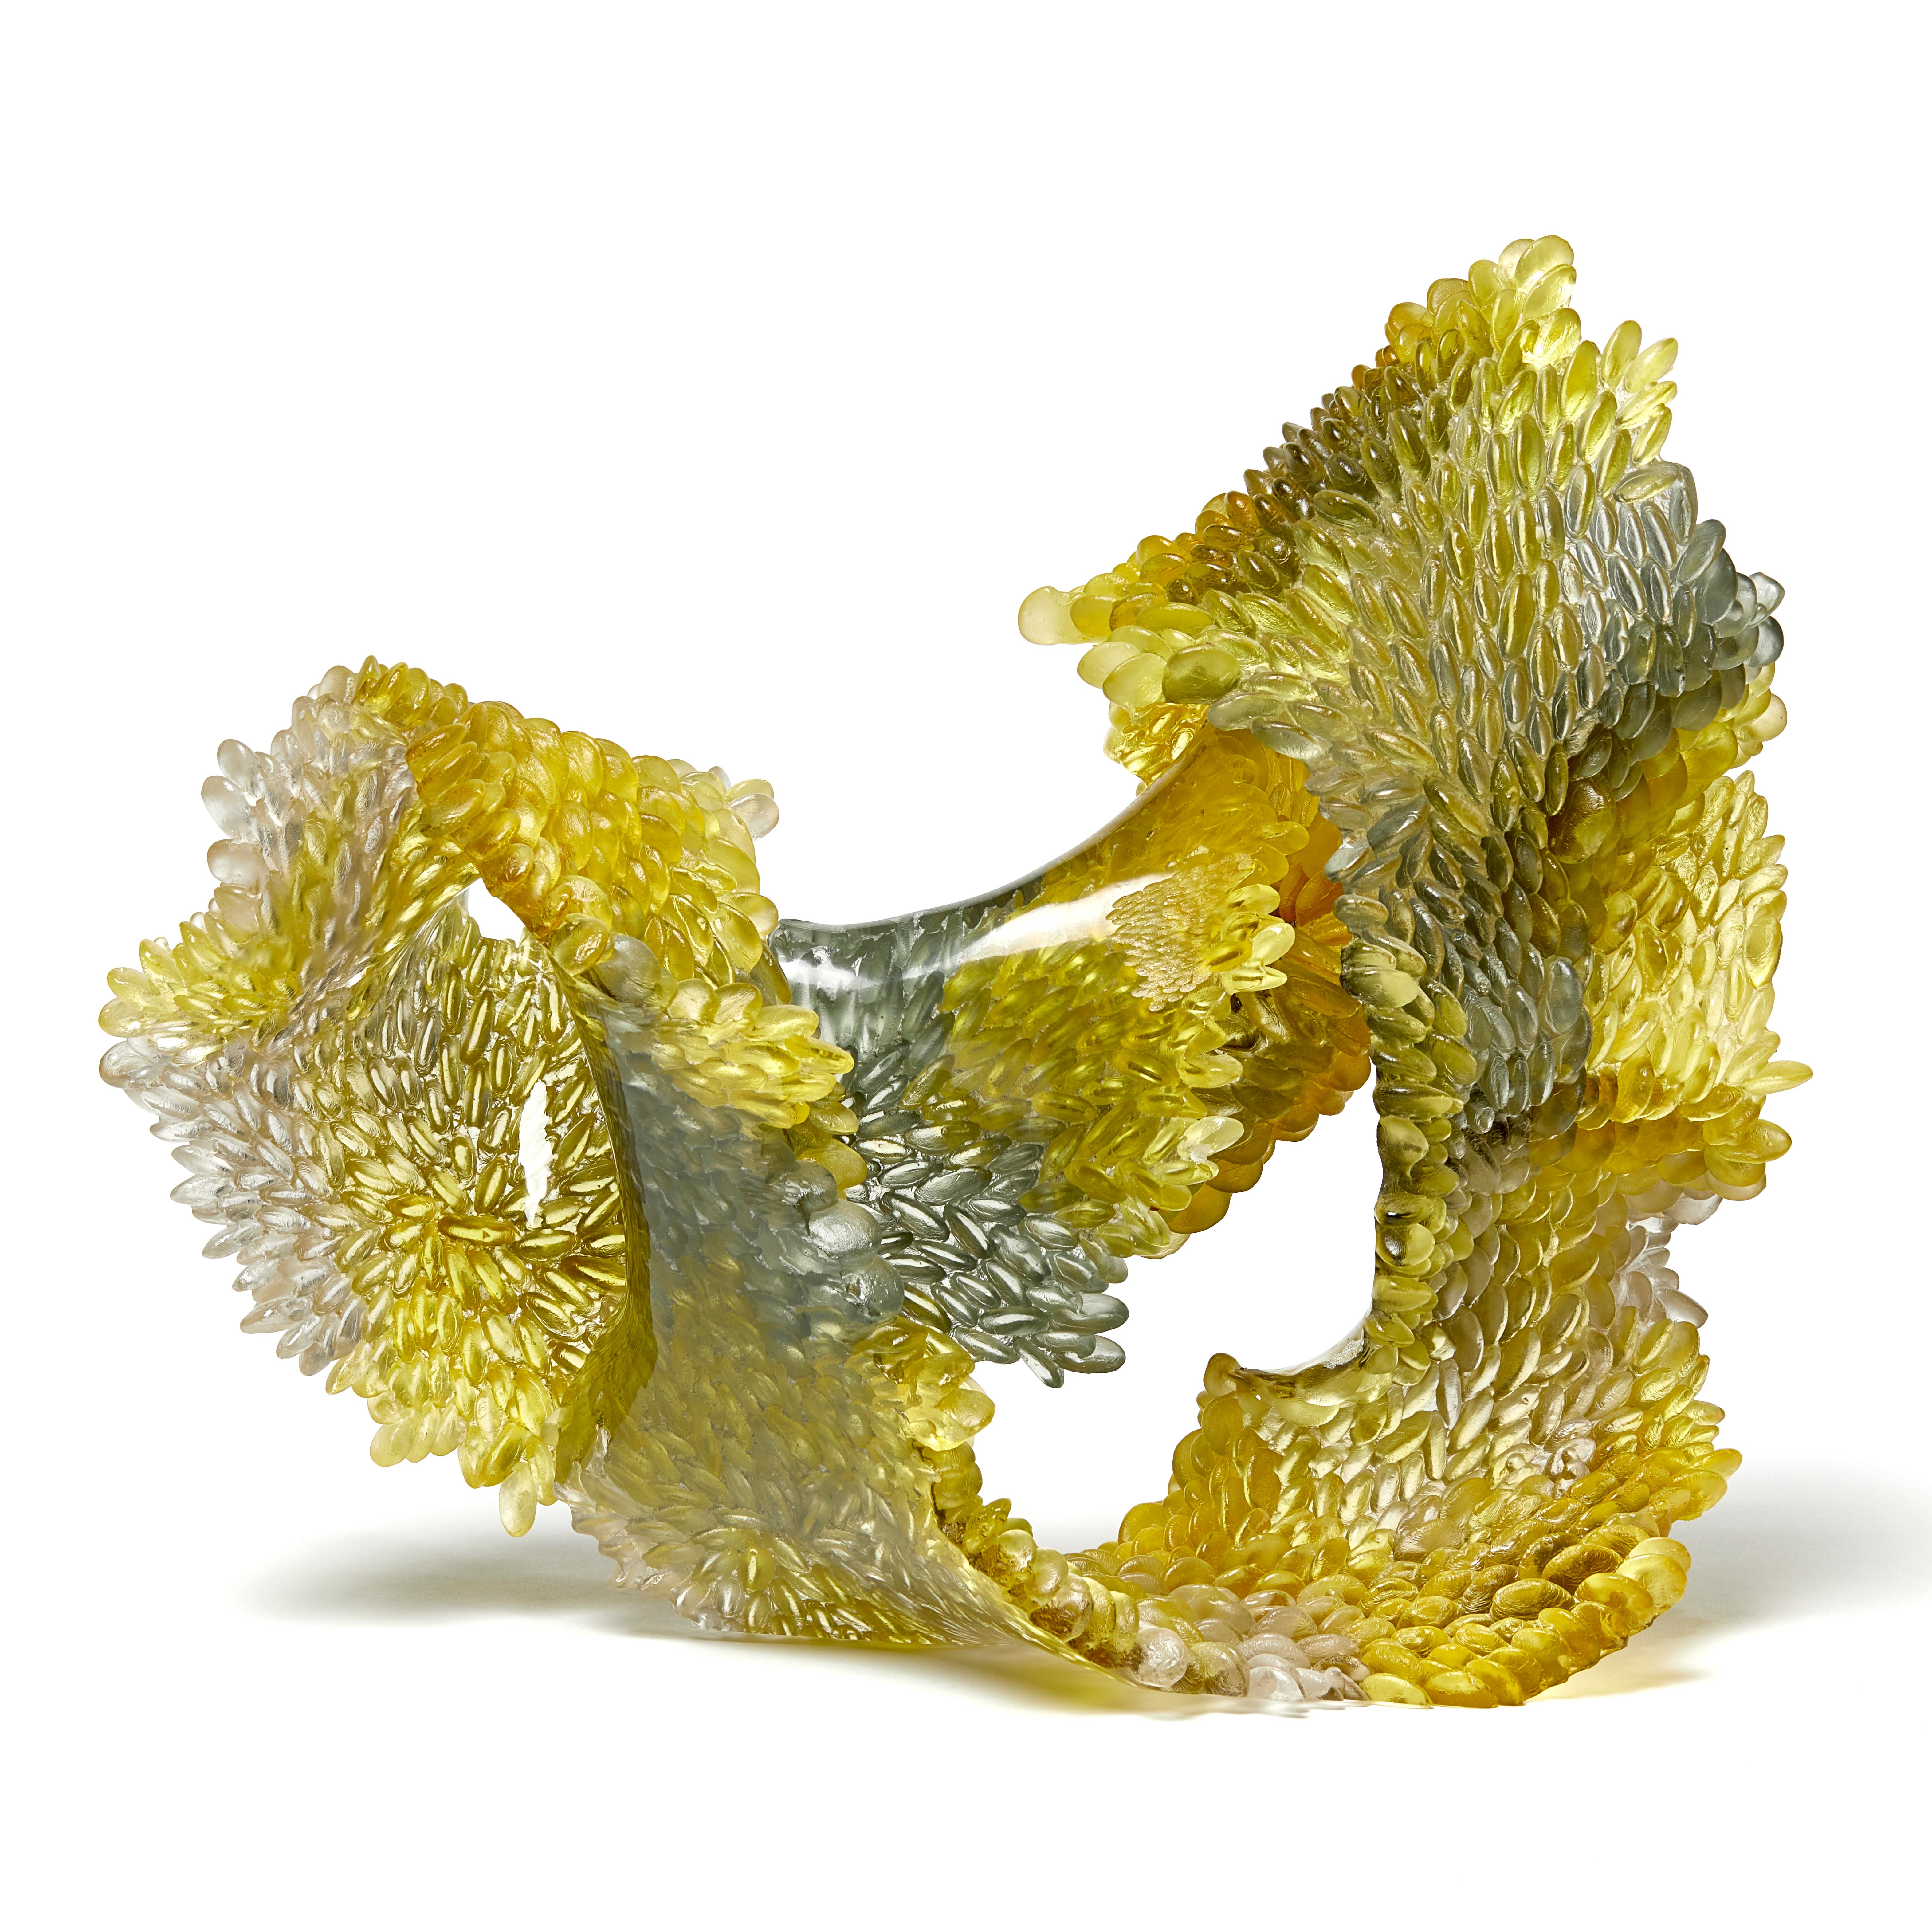 British The Way it Twists, Unique Glass Sculpture in Grey & Gold by Nina Casson McGarva